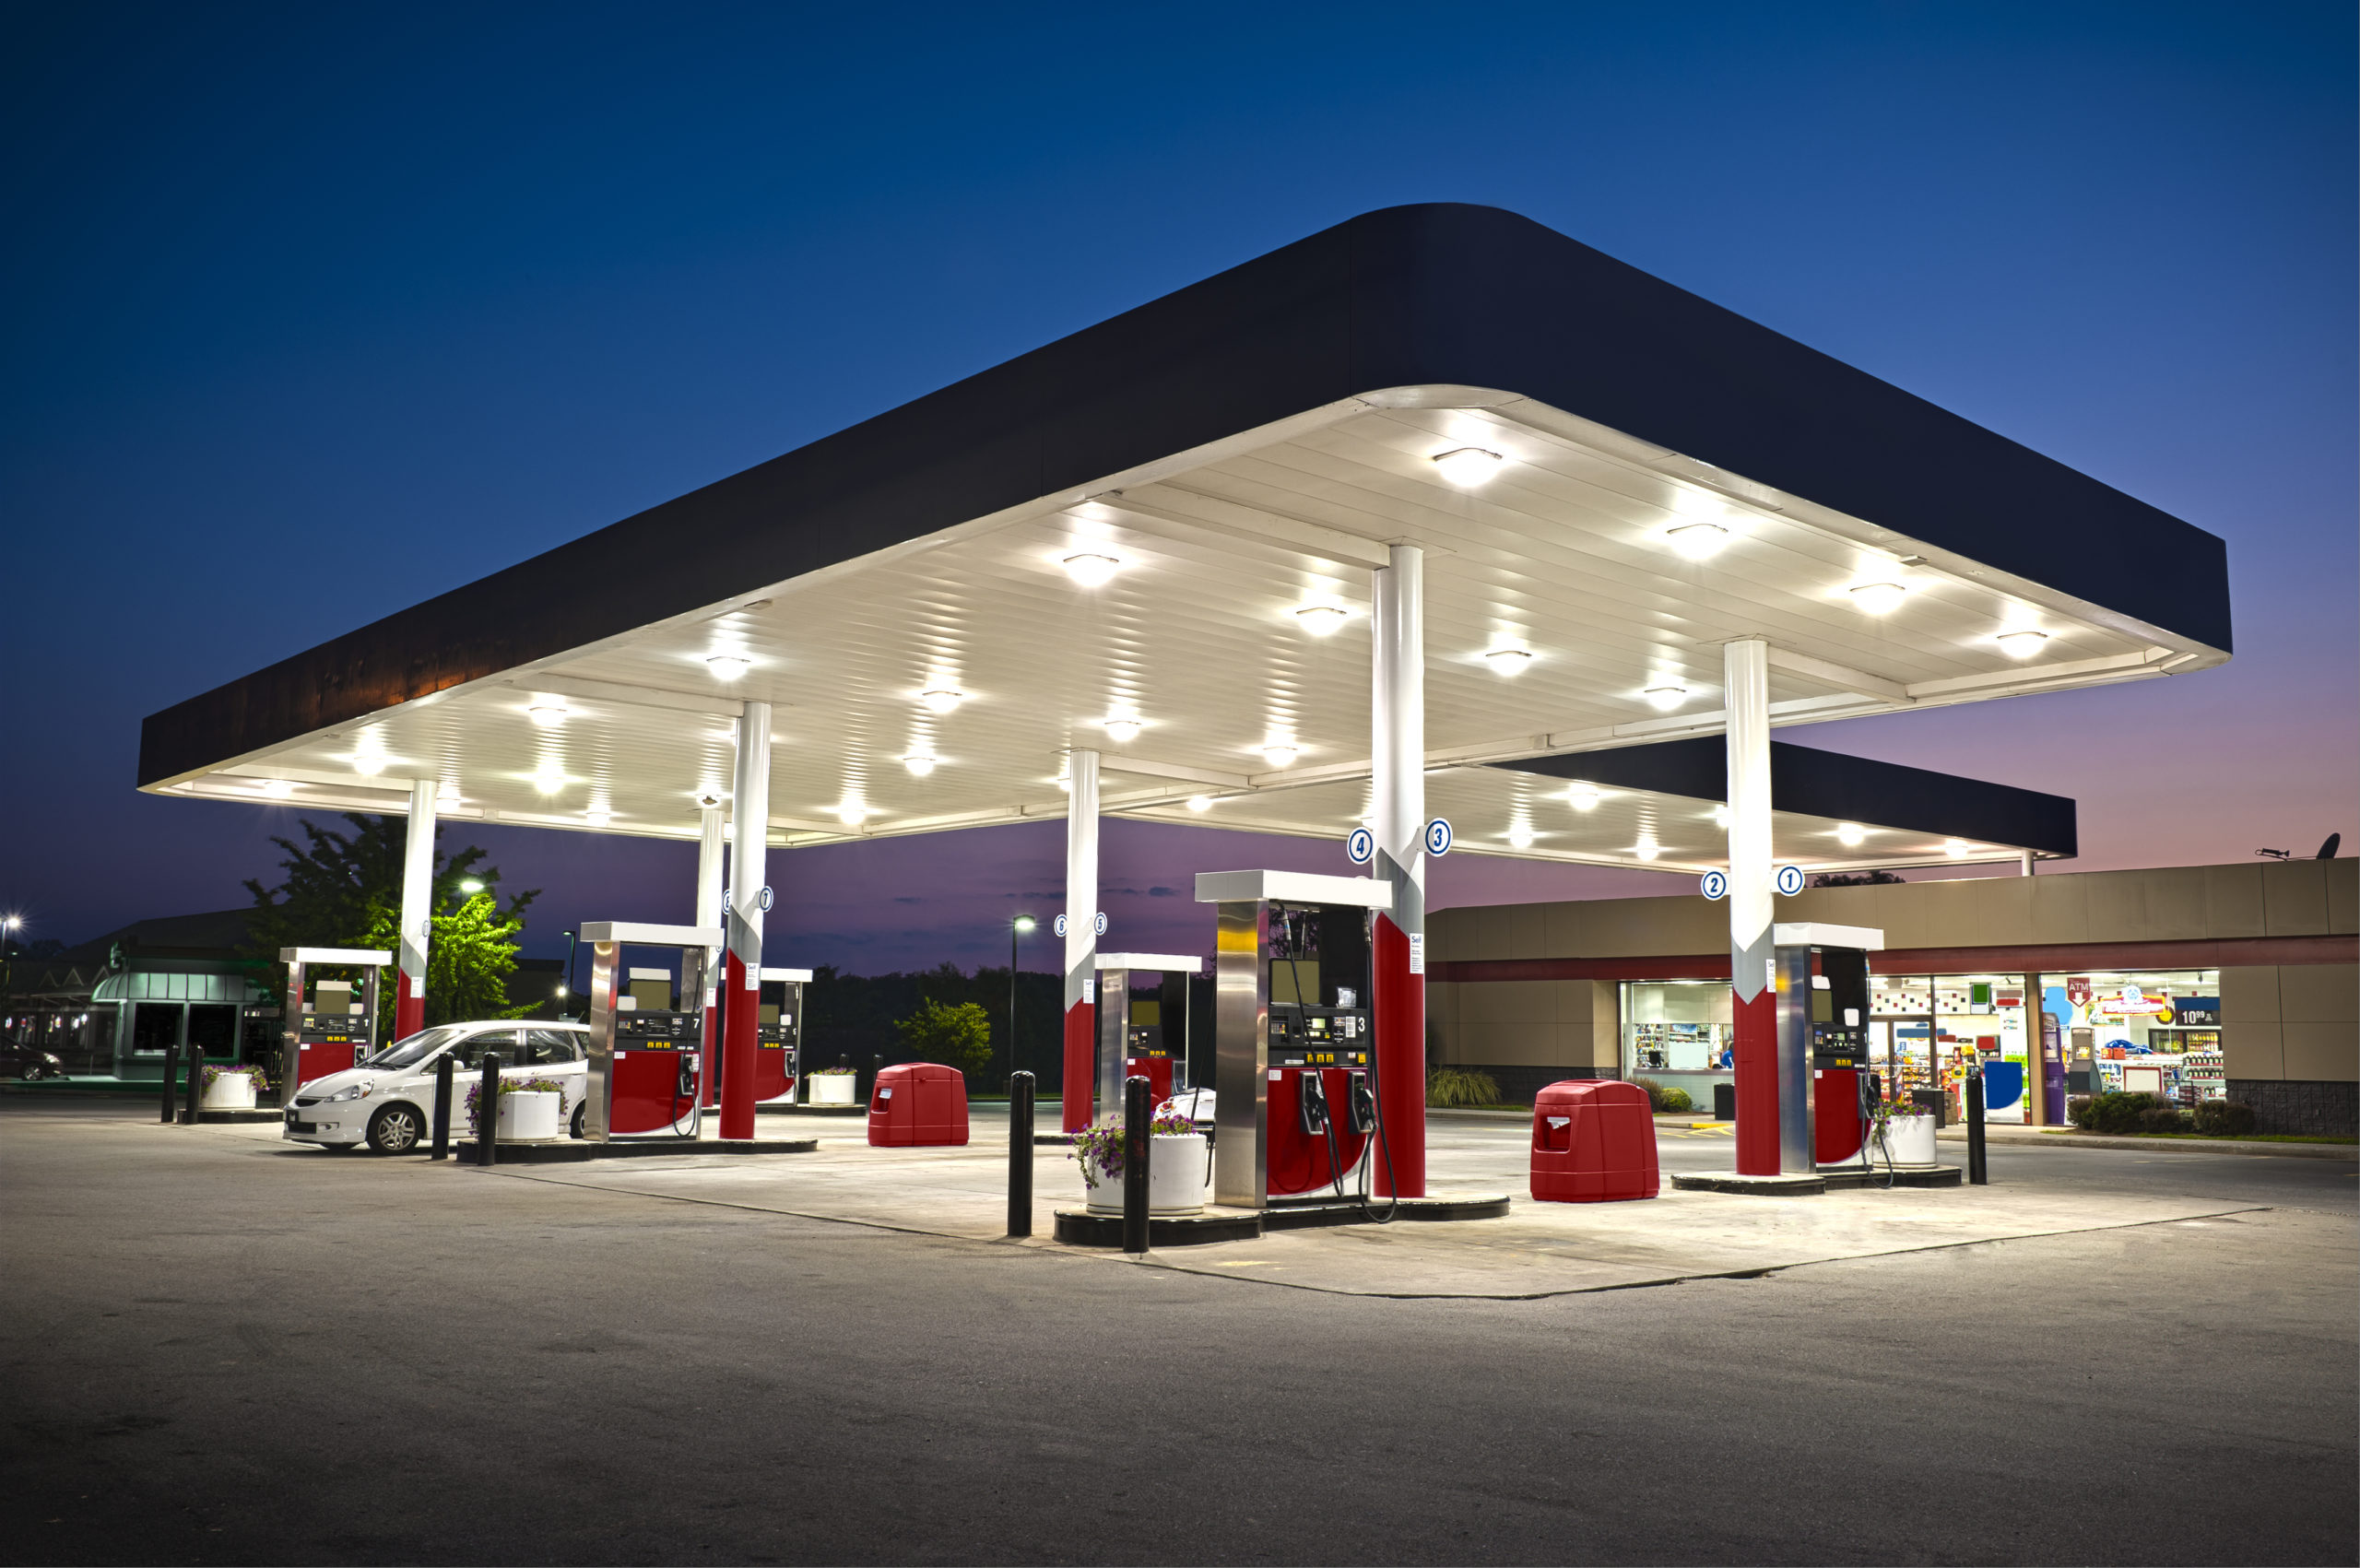 A brand new gas station and convenience store